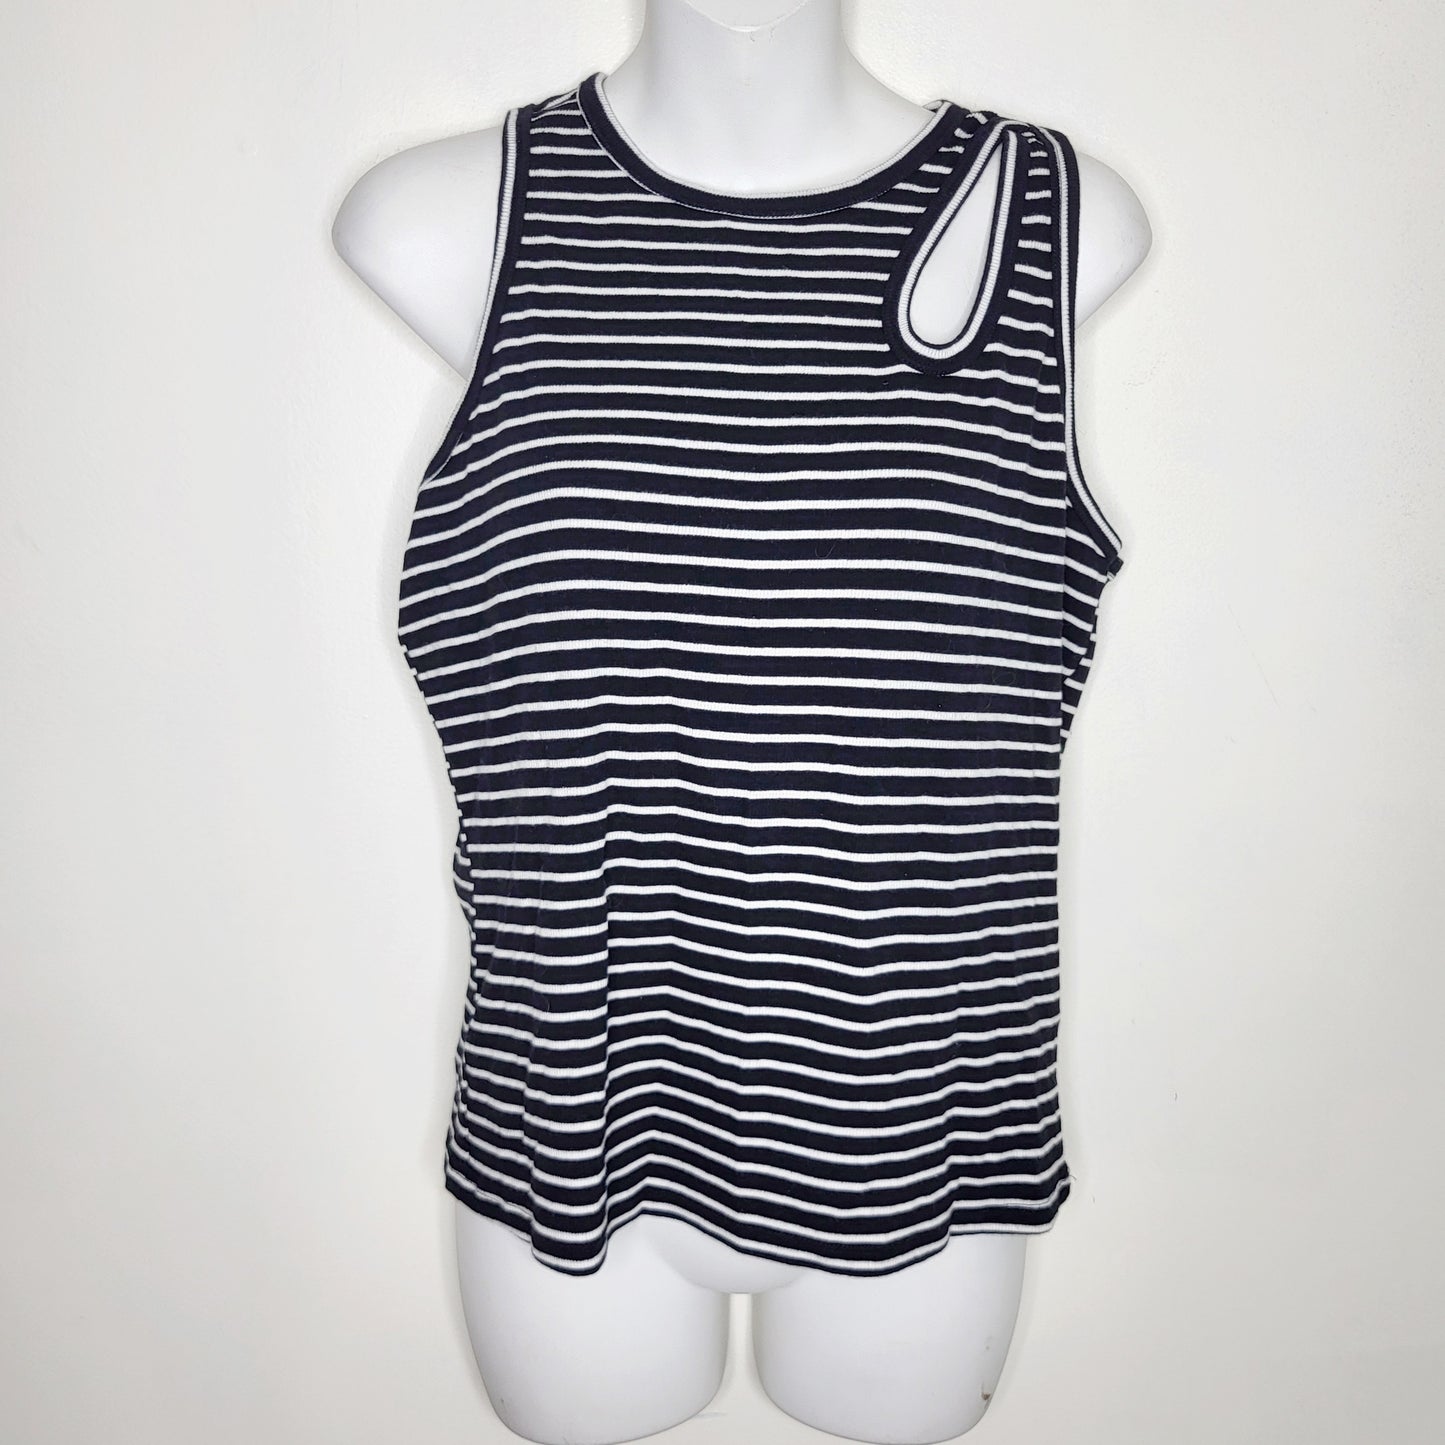 RVOS1 - Ricki's black striped ribbed tank top with cut out.  Sizes like a medium